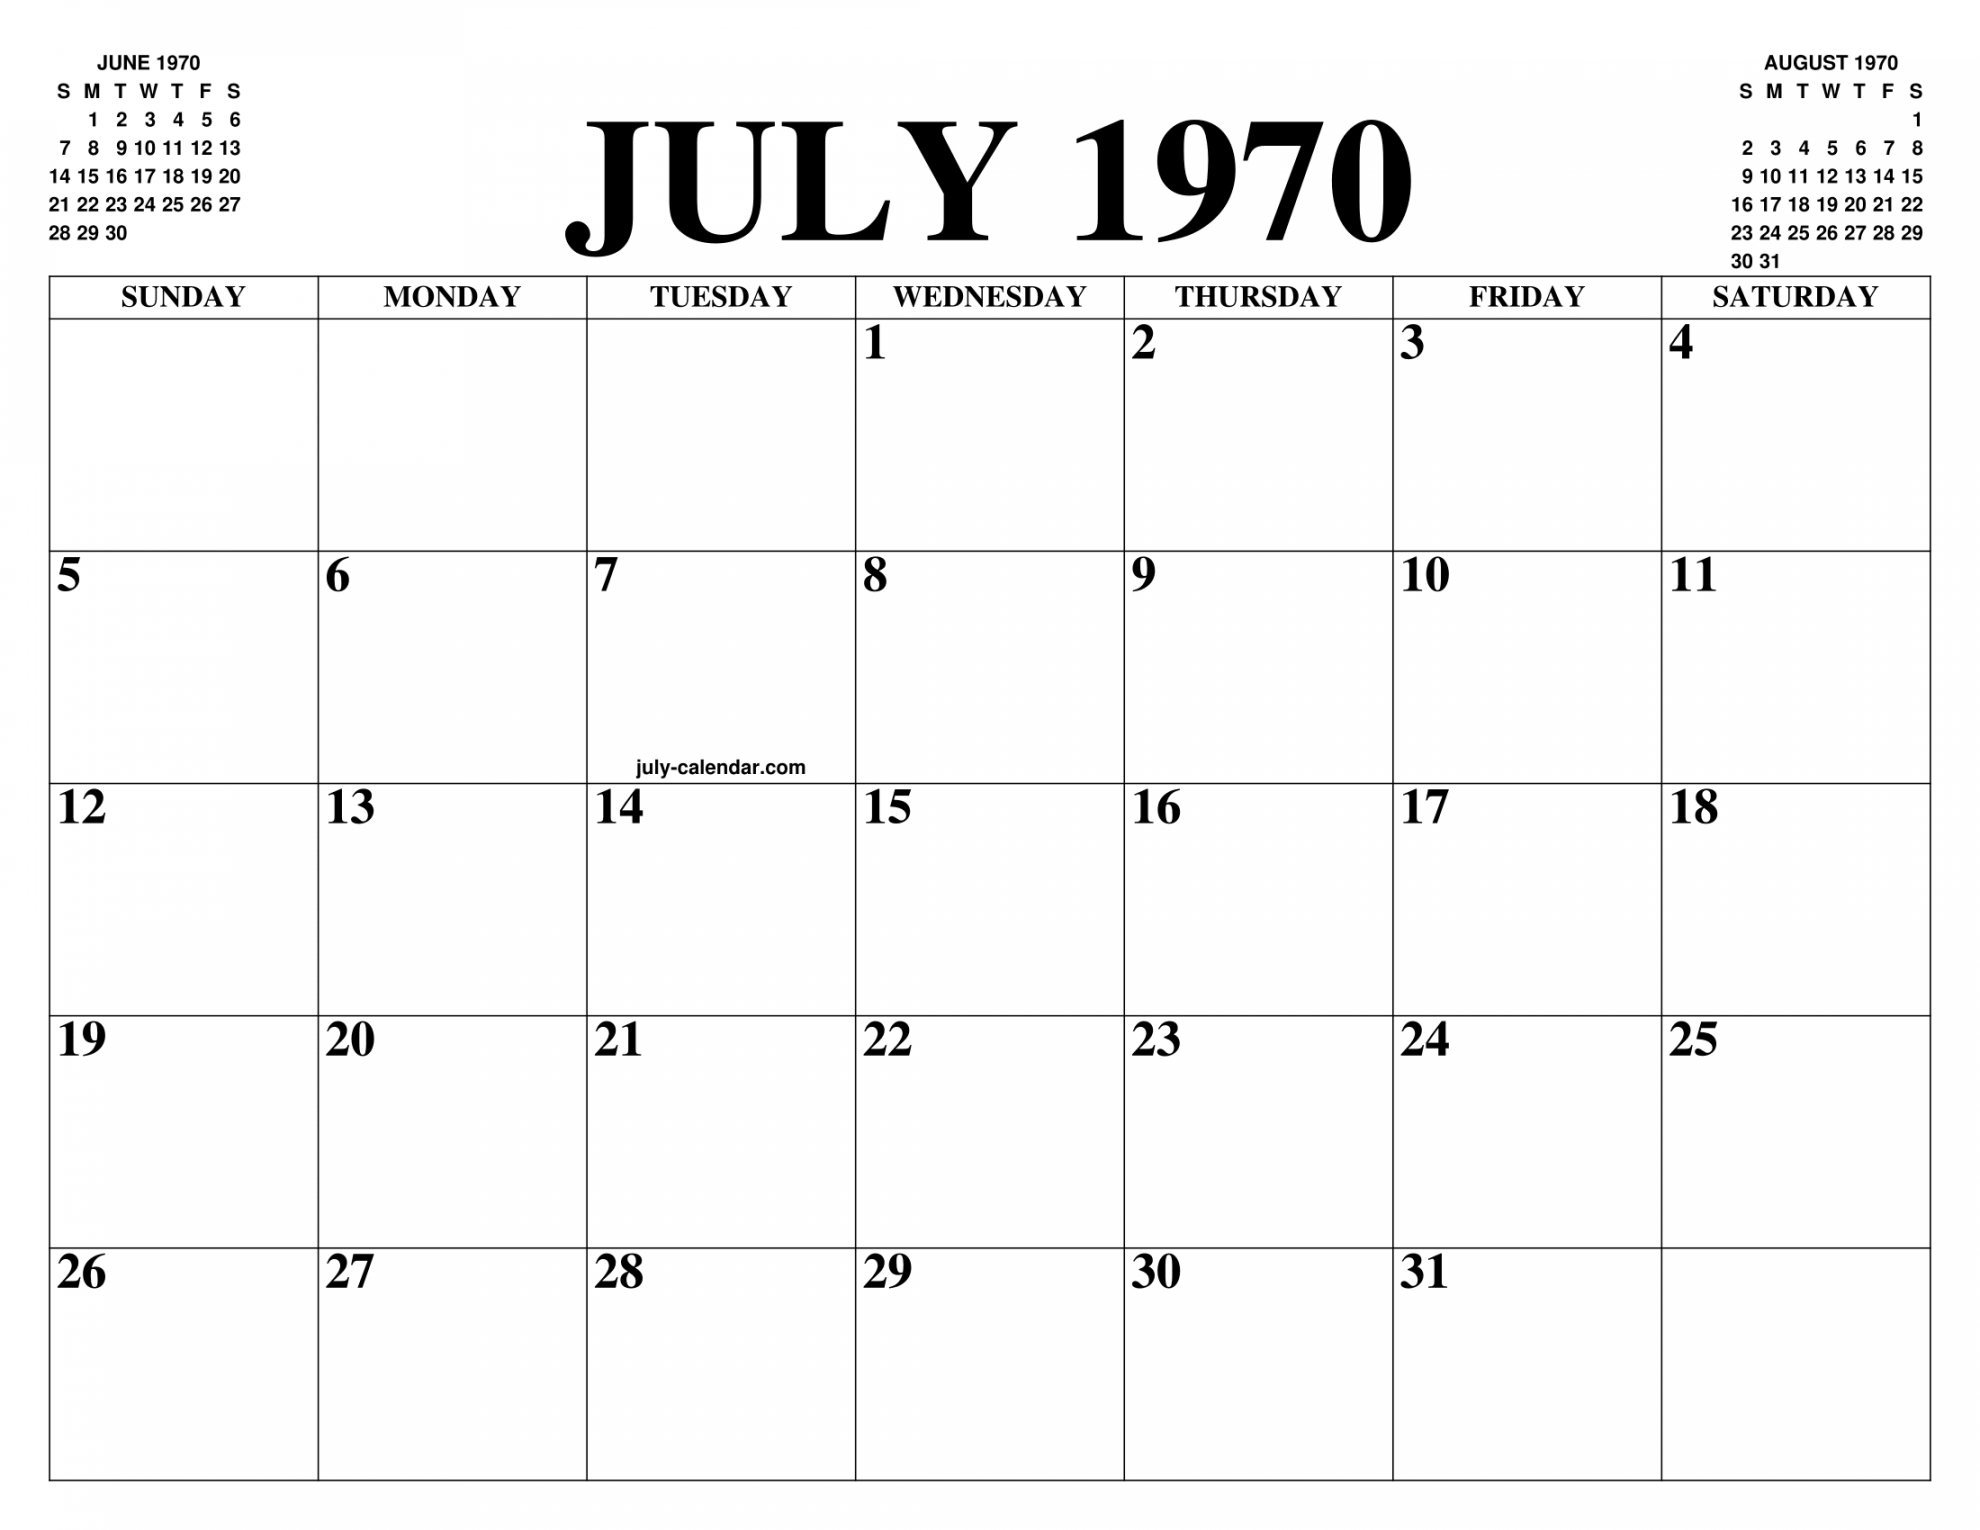 JULY  CALENDAR OF THE MONTH: FREE PRINTABLE JULY CALENDAR OF